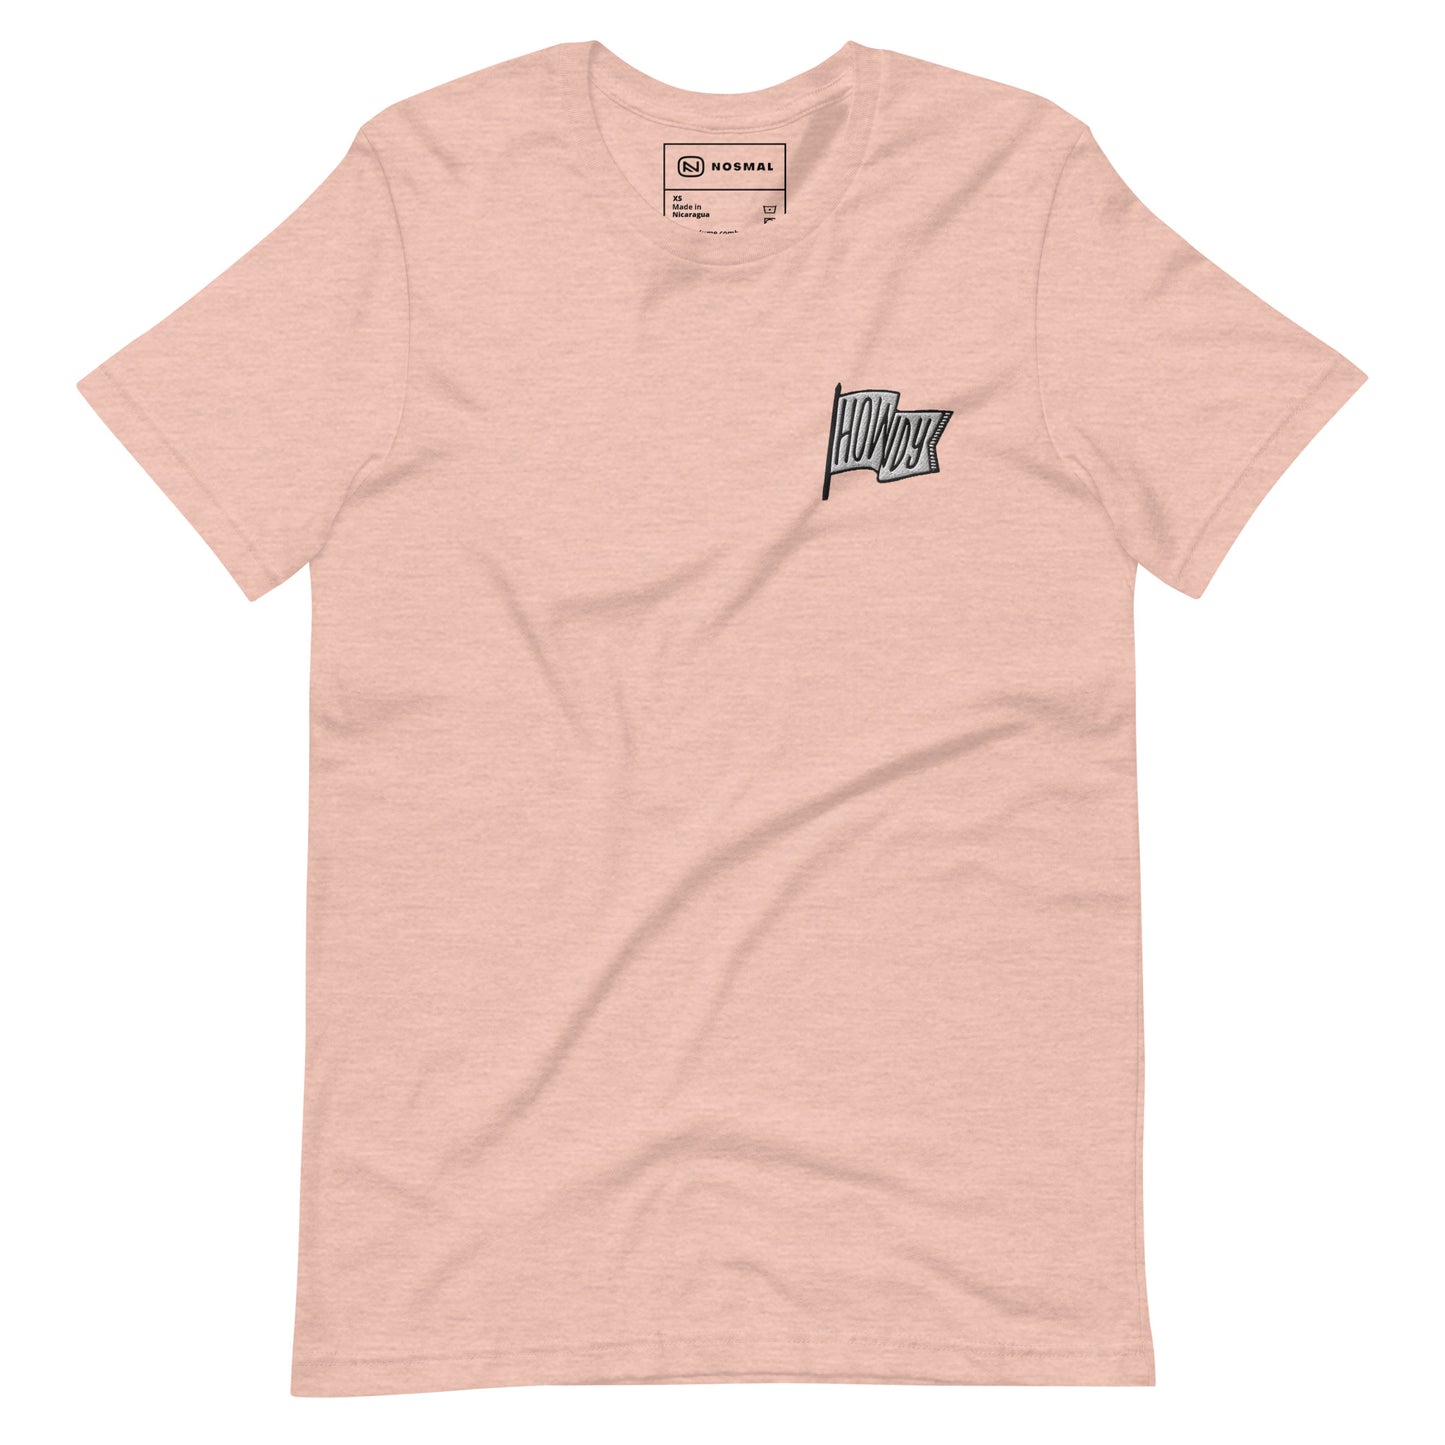 Straight on view of howdy embroidered design on heather prism peach unisex t-shirt.